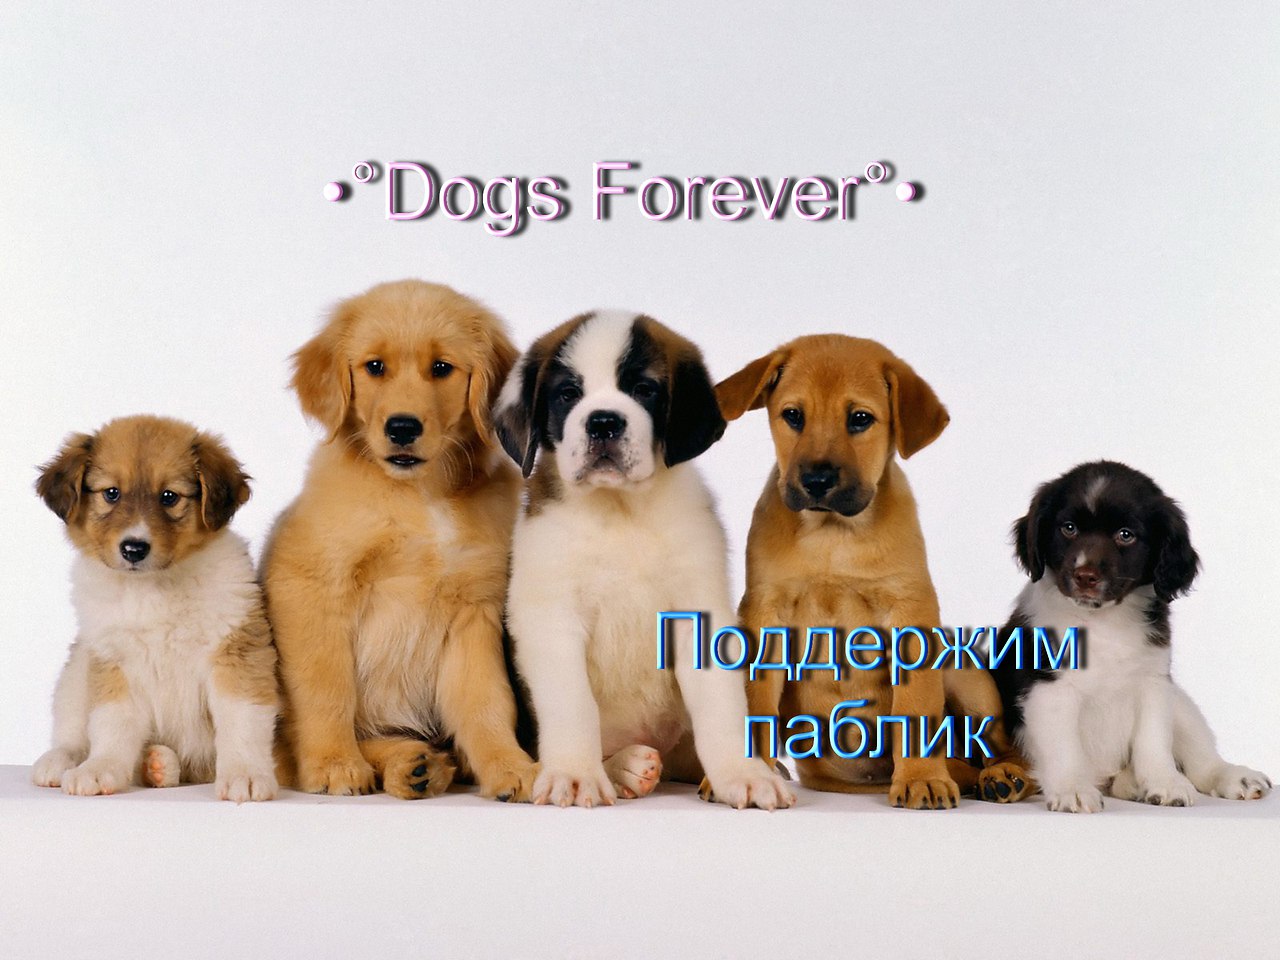   .Dogs Forever. , !!!    !!!)))